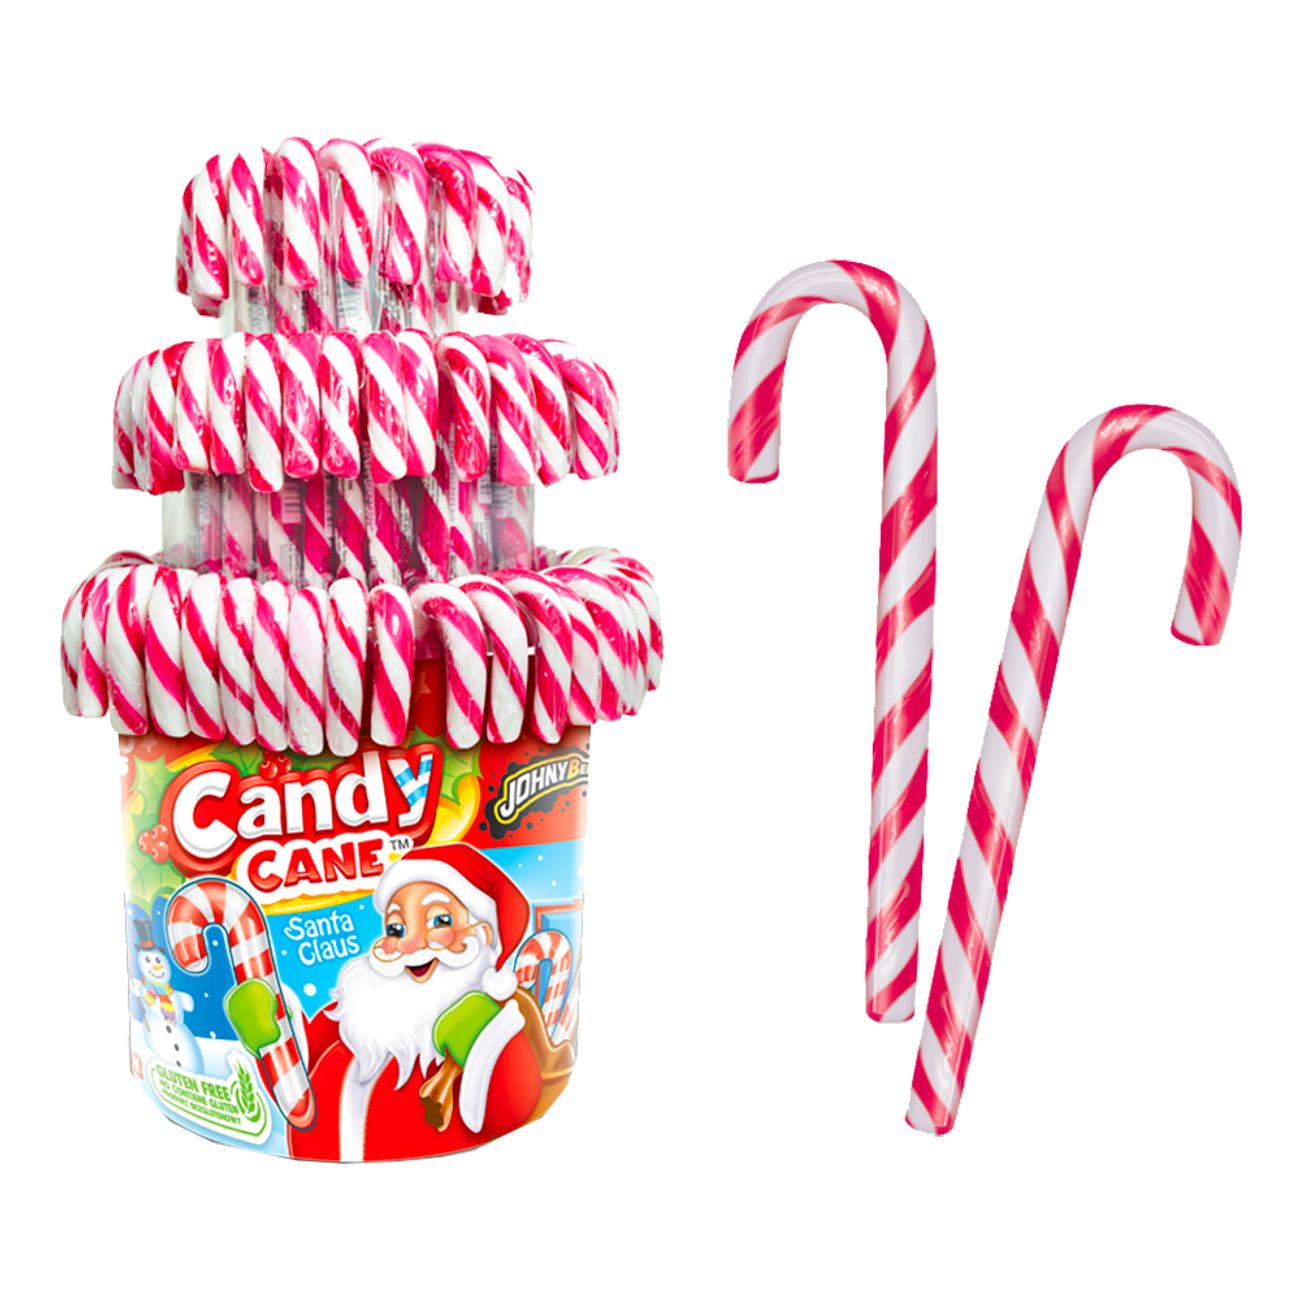 candy-canes-rodvit-90018-1